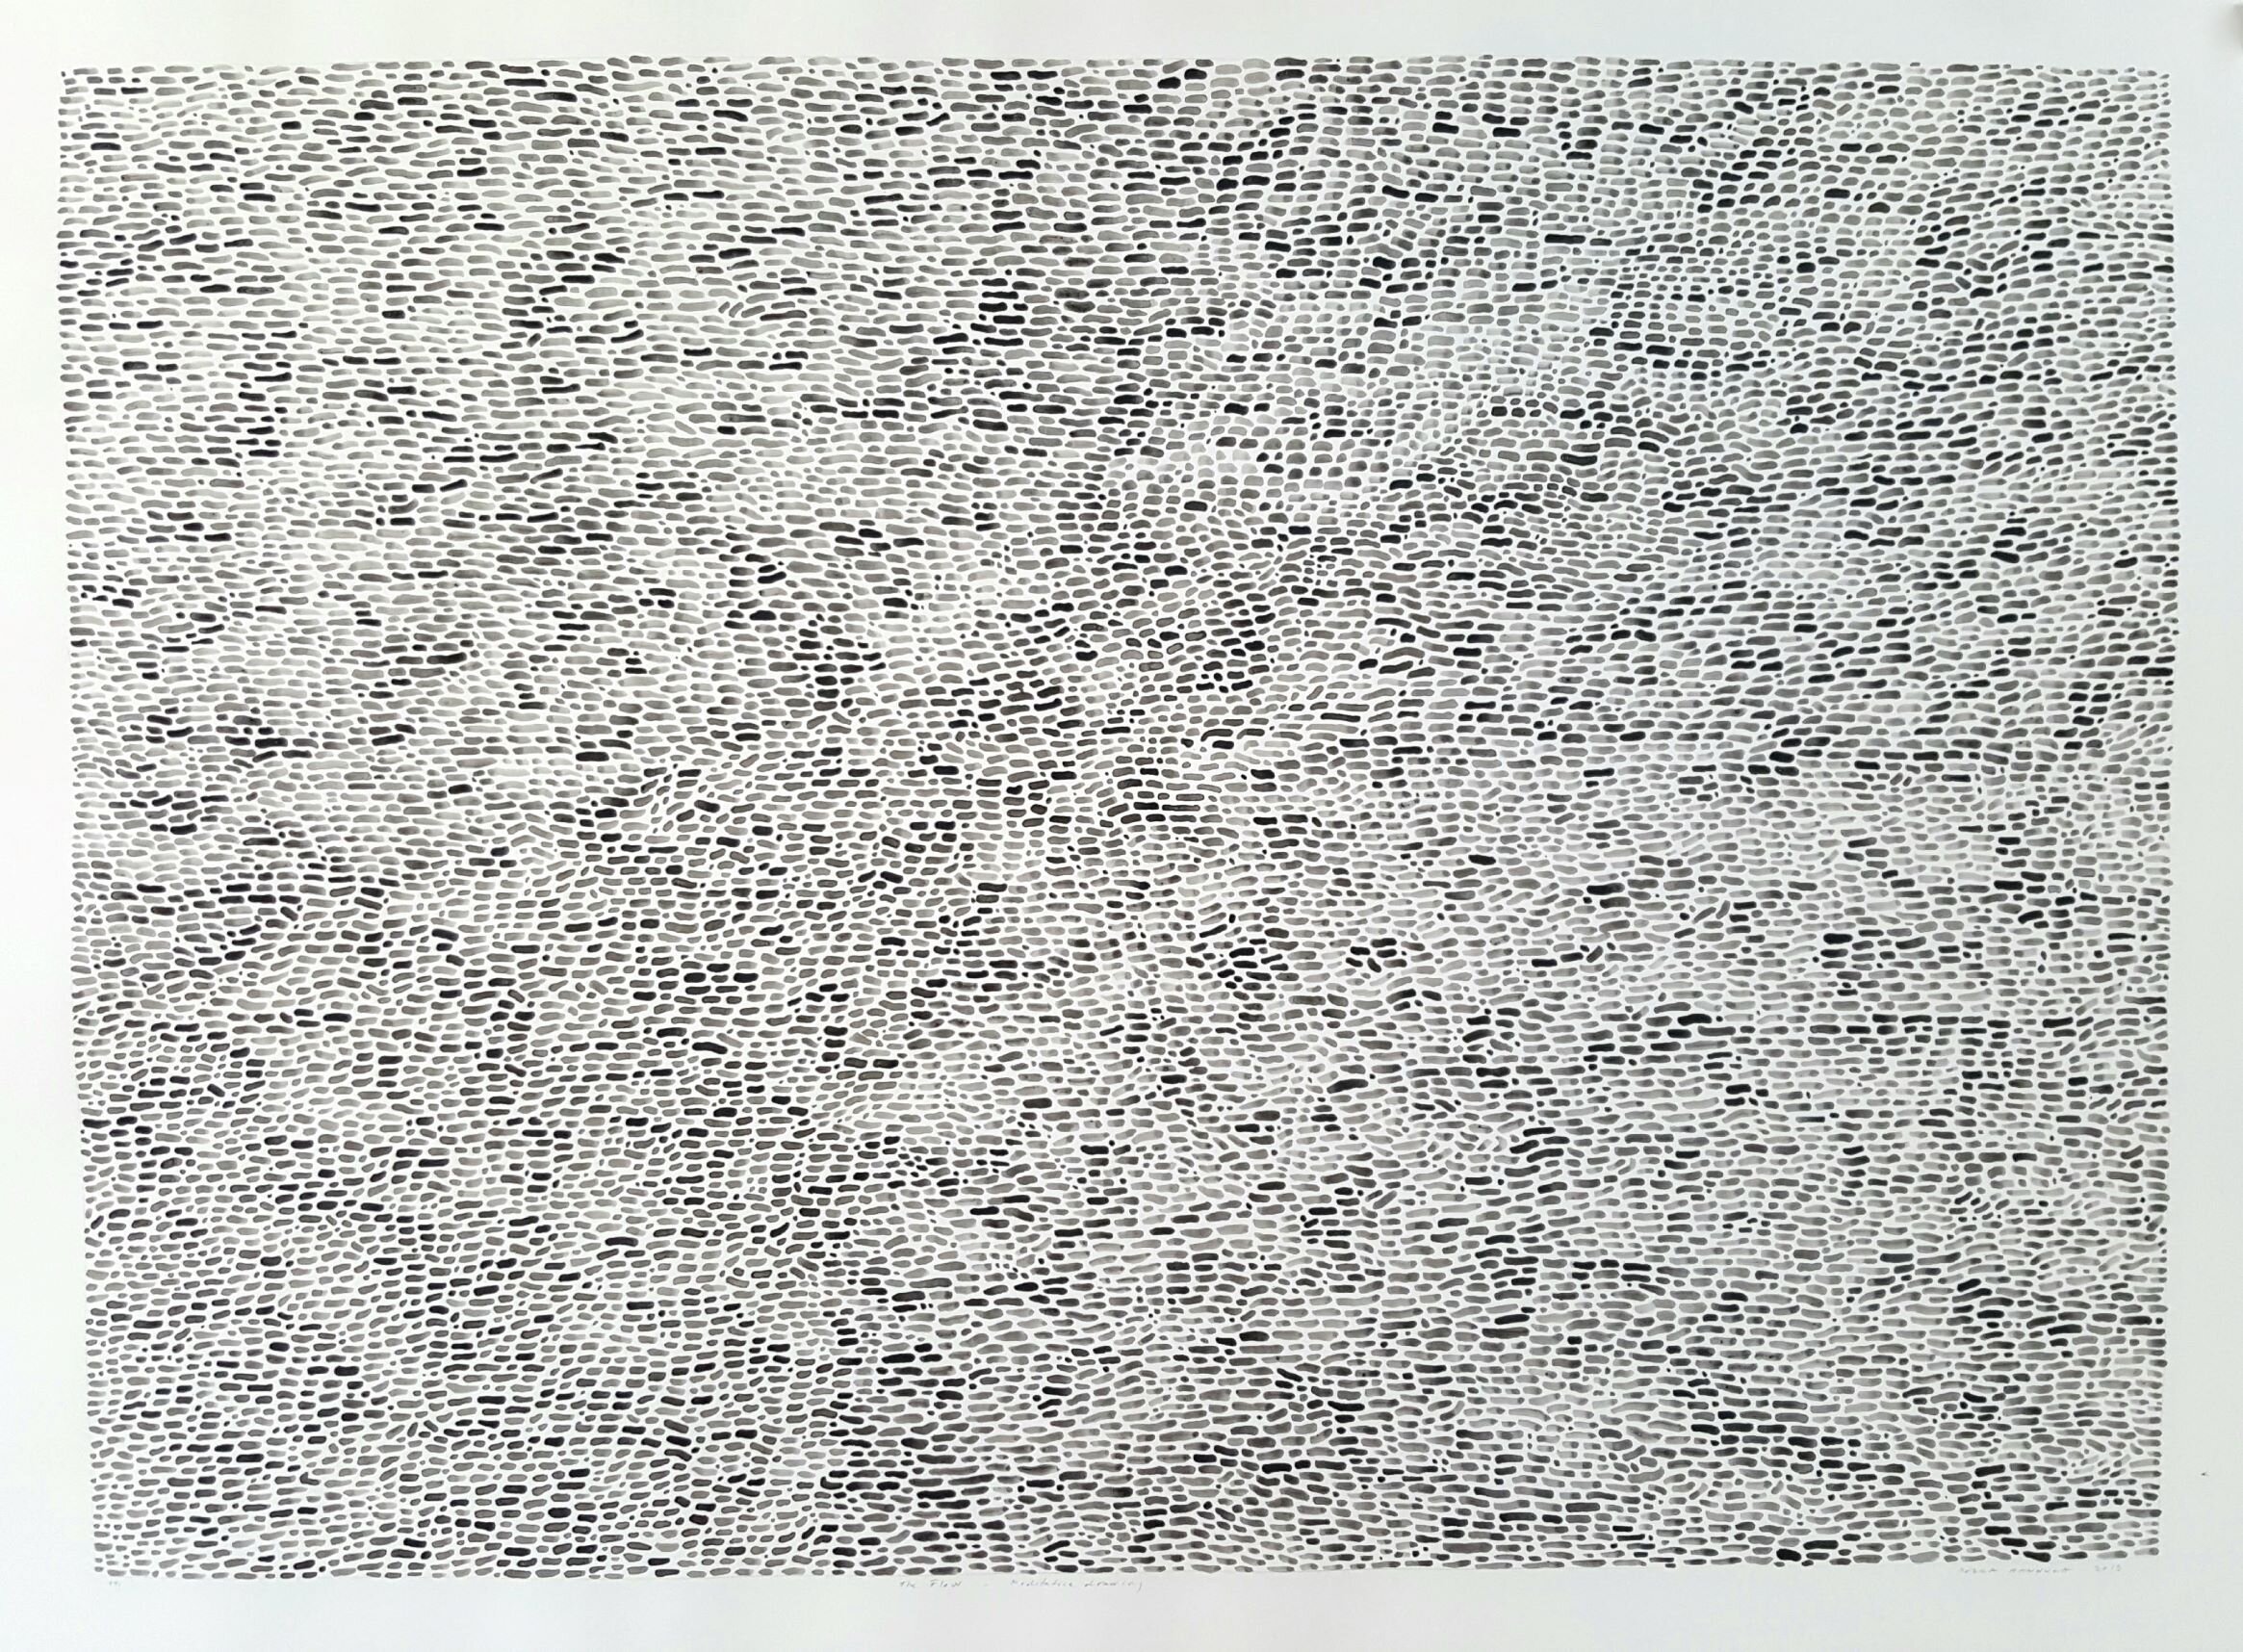  Completed simplified drawing. Expansion through repetition.  